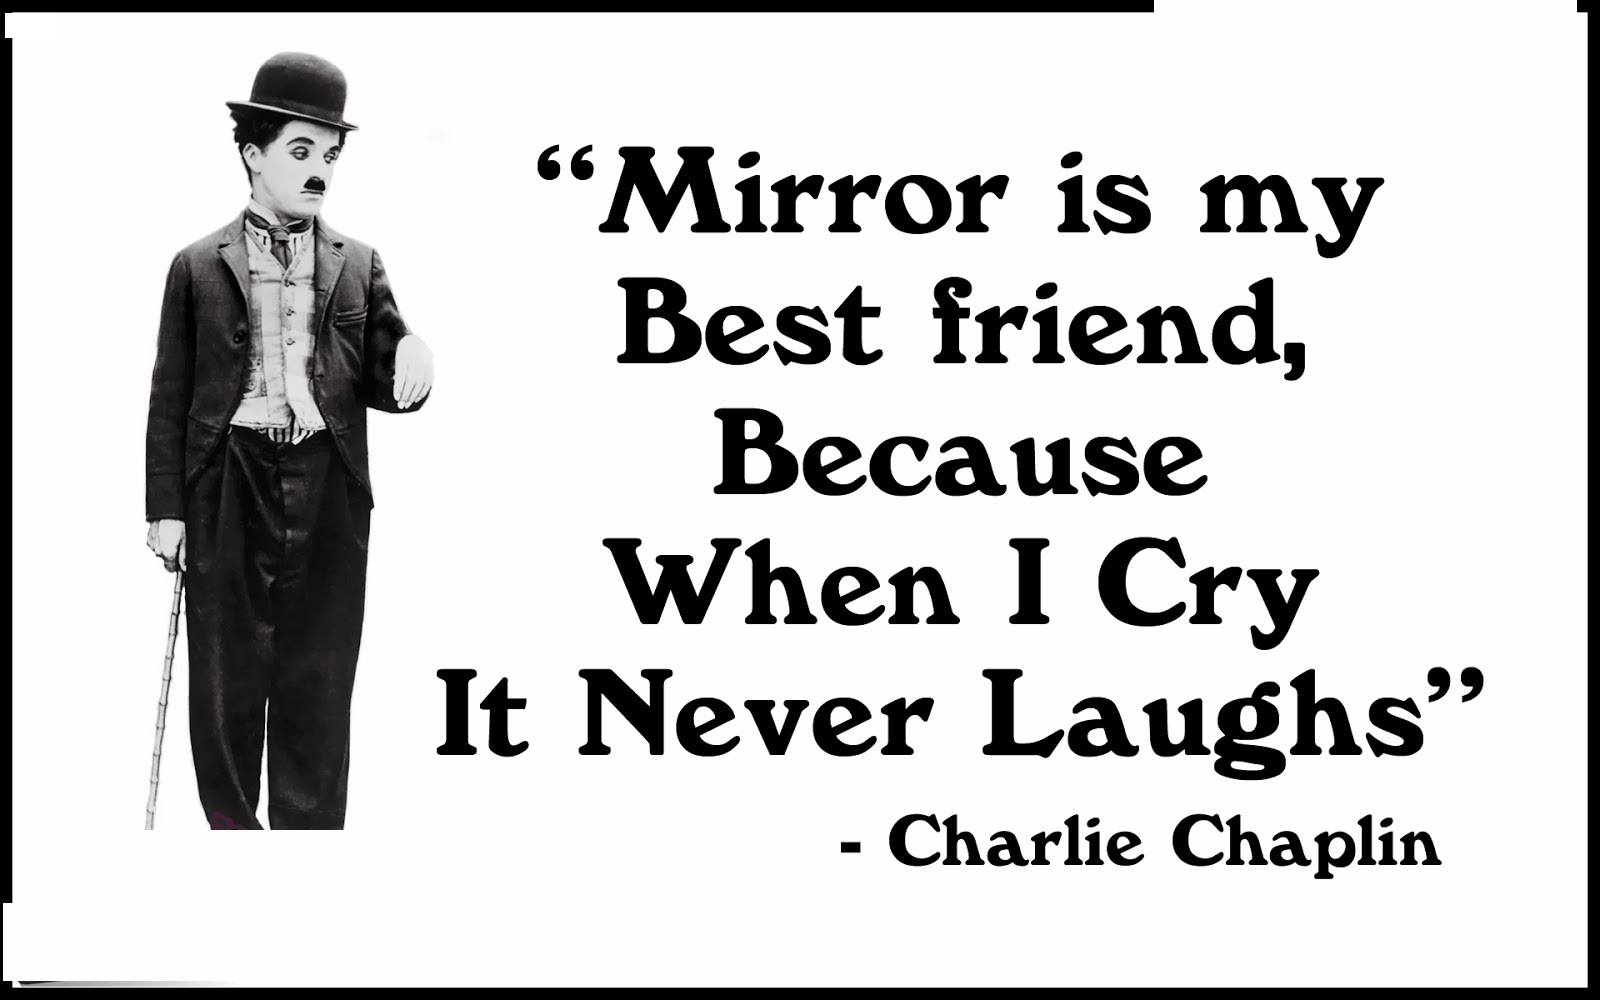 Charlie Chaplin Quotes images